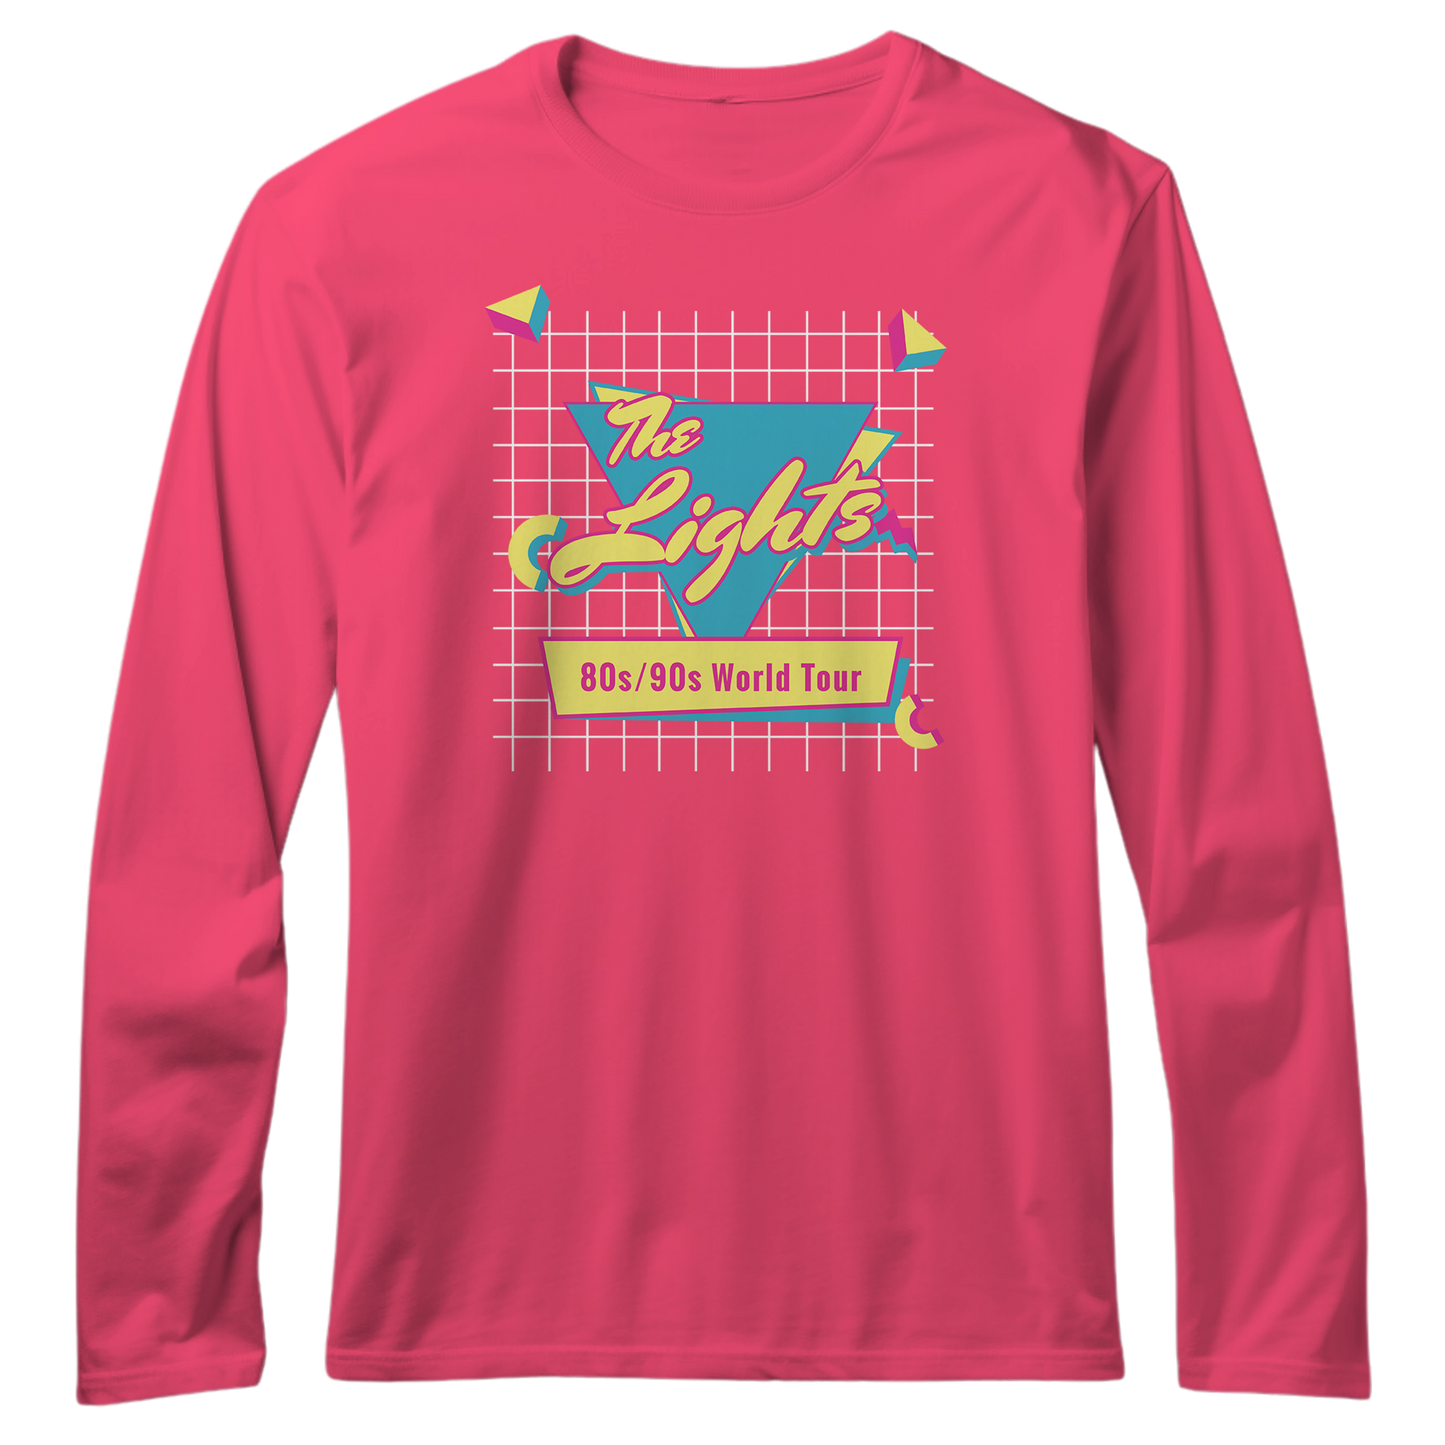 Lights Totally Awesome Long Sleeve Shirt - Neon Pink